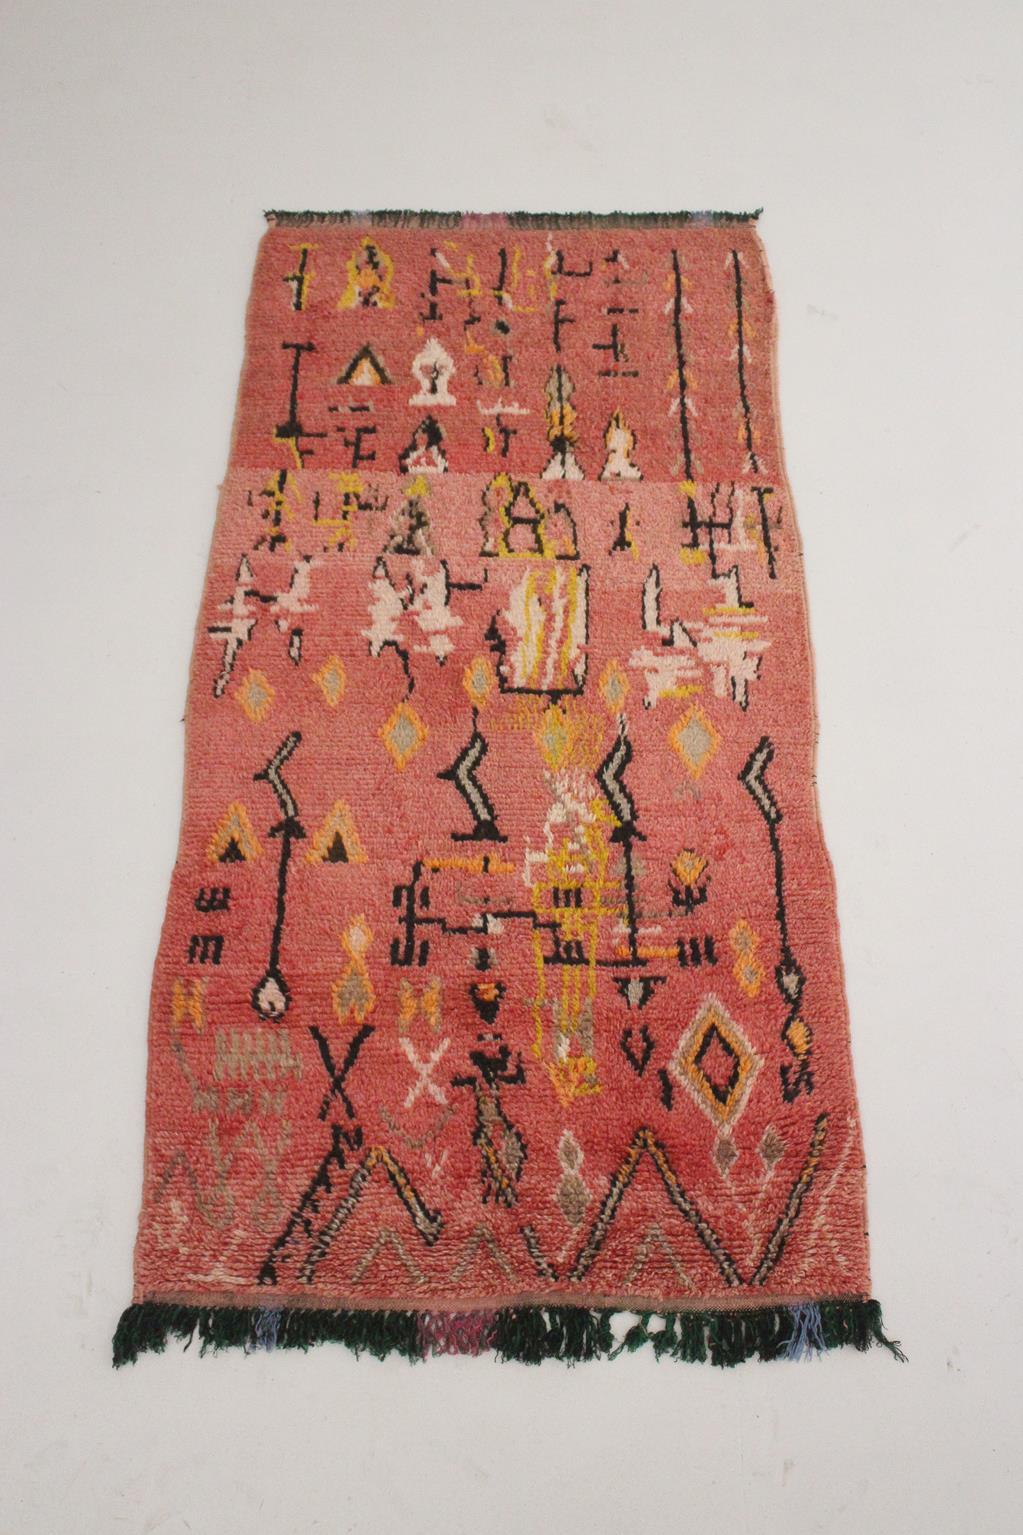 This unique, vintage runner rug was sourced in the area of Ait Bouguemez, Morocco. It is a real vintage Azilal rug with light signs of age but in an beautiful condition overall and unmatched quality. The main background color is a pink with yellow,